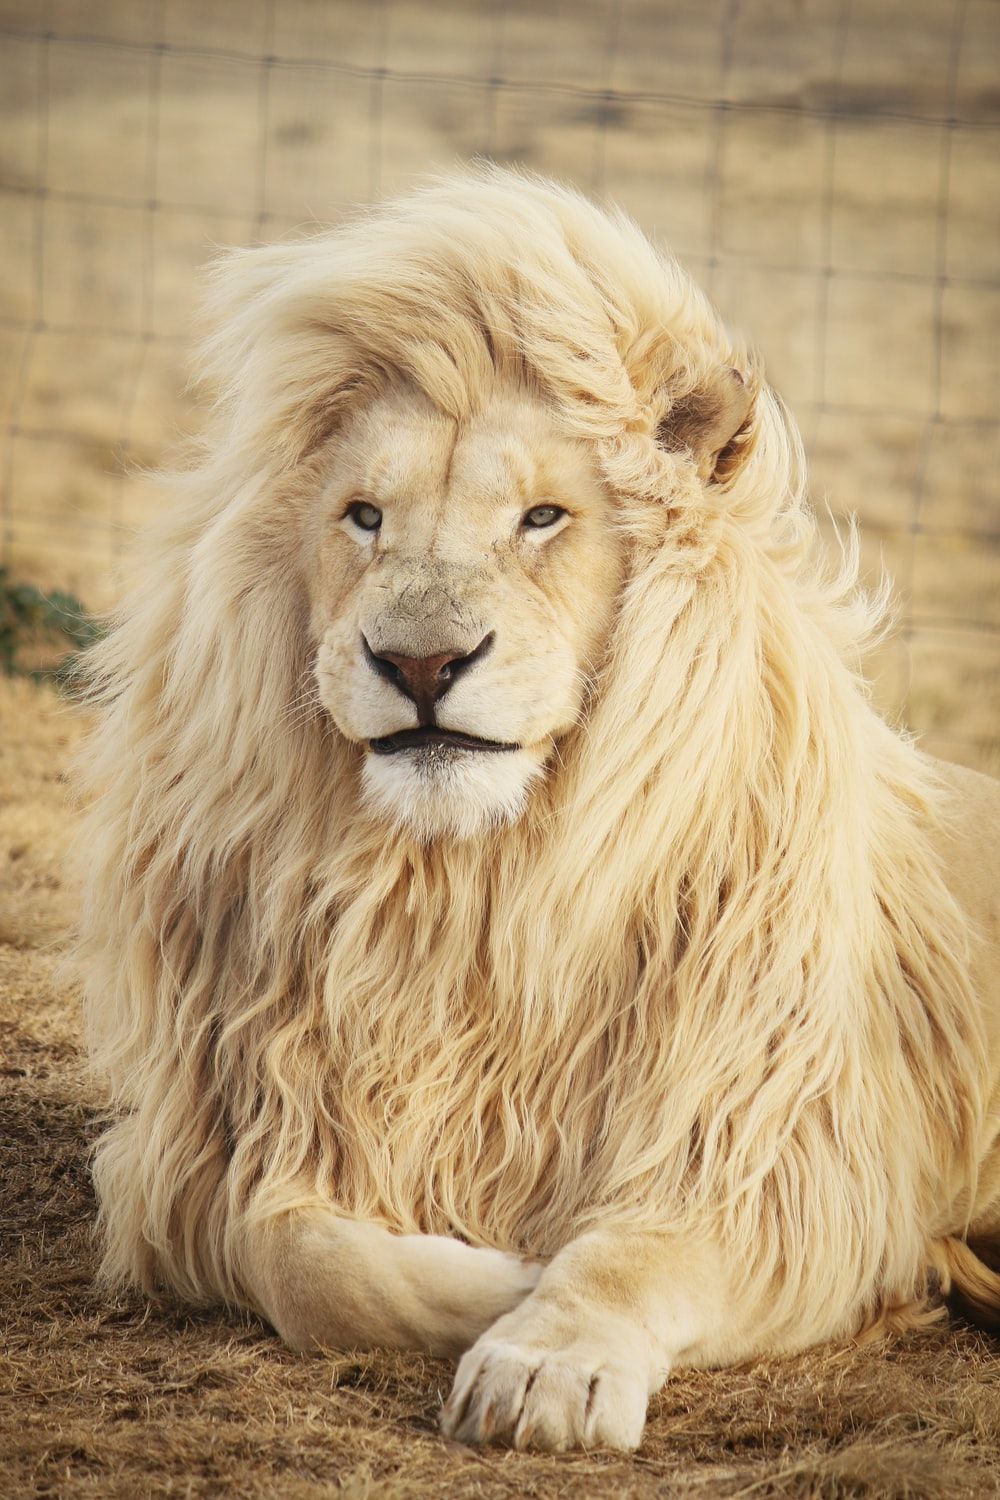 A white lion with a shaggy mane and blue eyes looks at the camera. - Lion